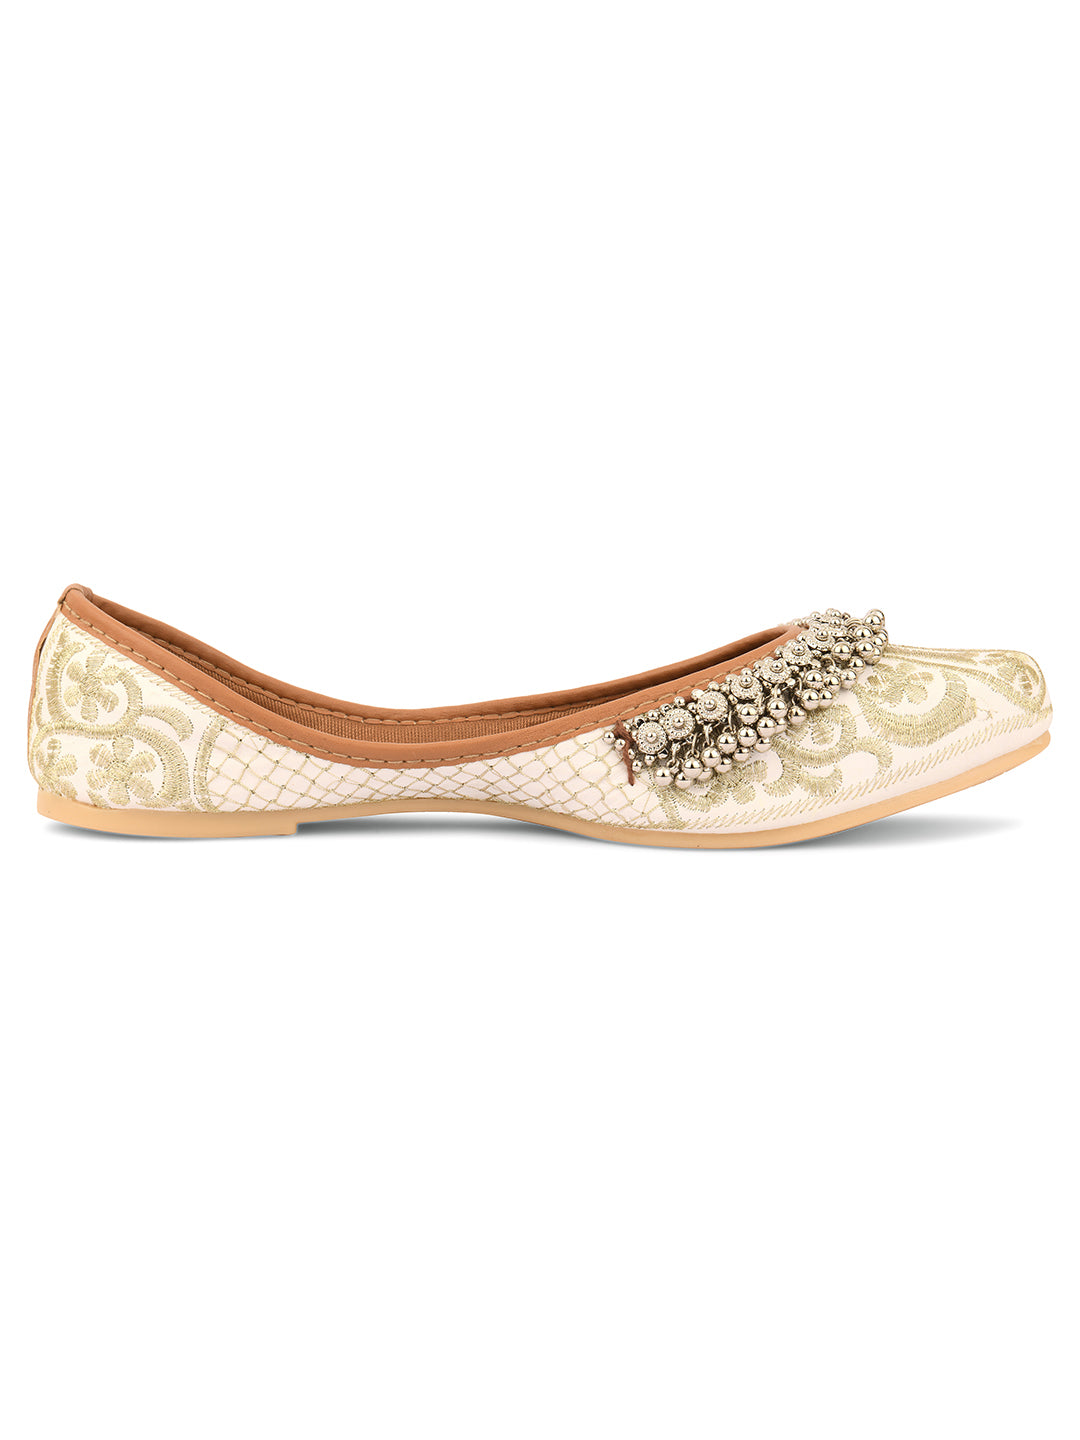 Women's Offwhite Embellished  Indian Ethnic Comfort Footwear - Desi Colour